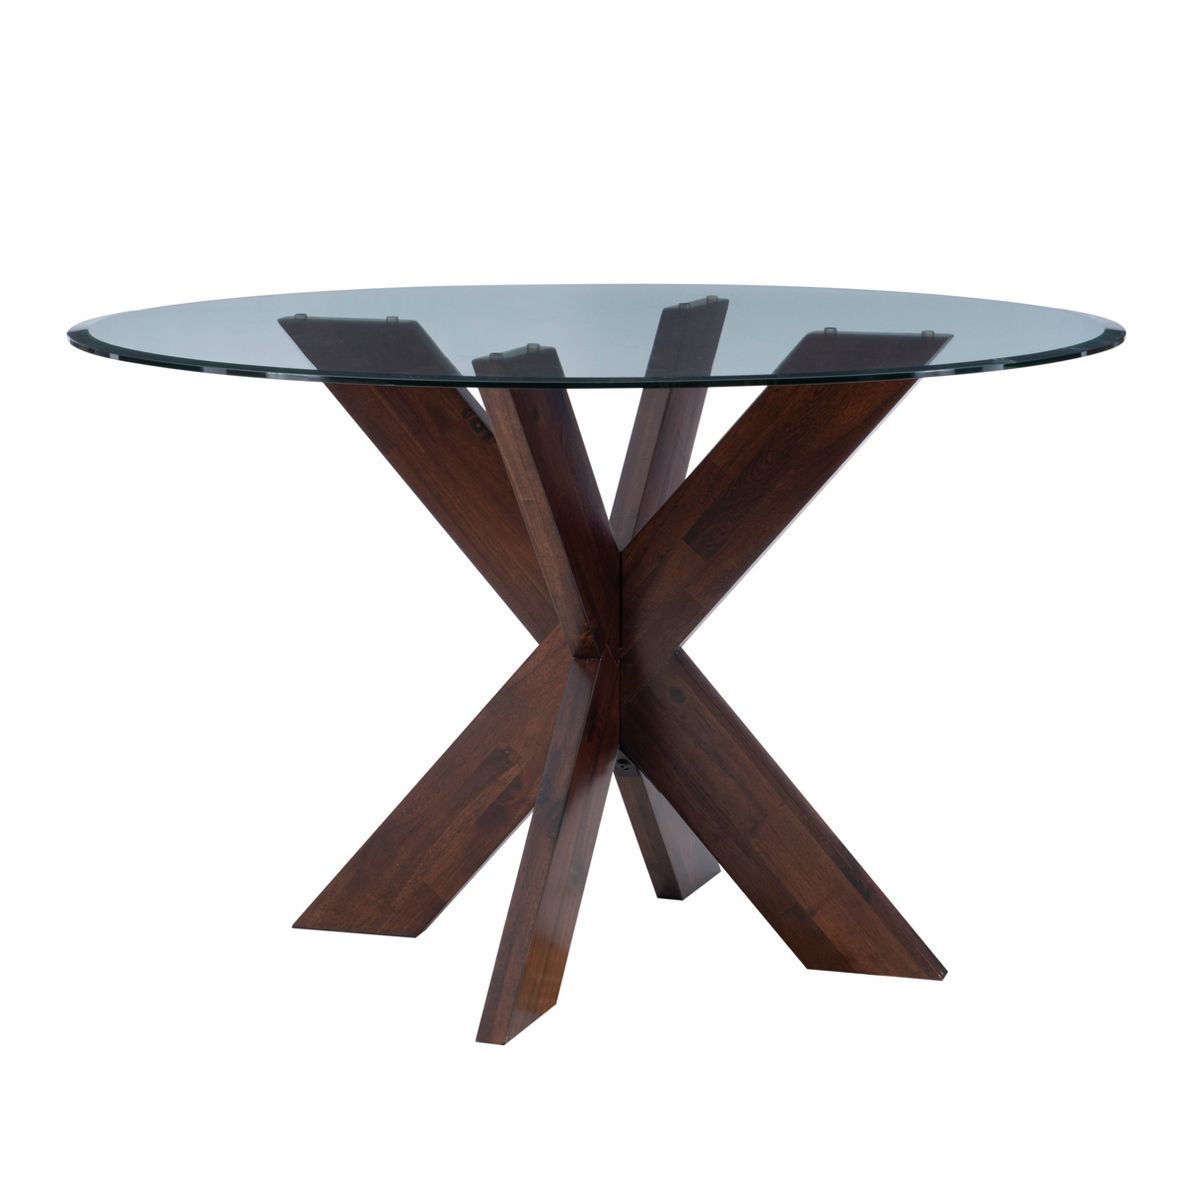 Target/Furniture/Kitchen & Dining Furniture/Dining Tables‎Shop this collectionShop all PowellAx... | Target